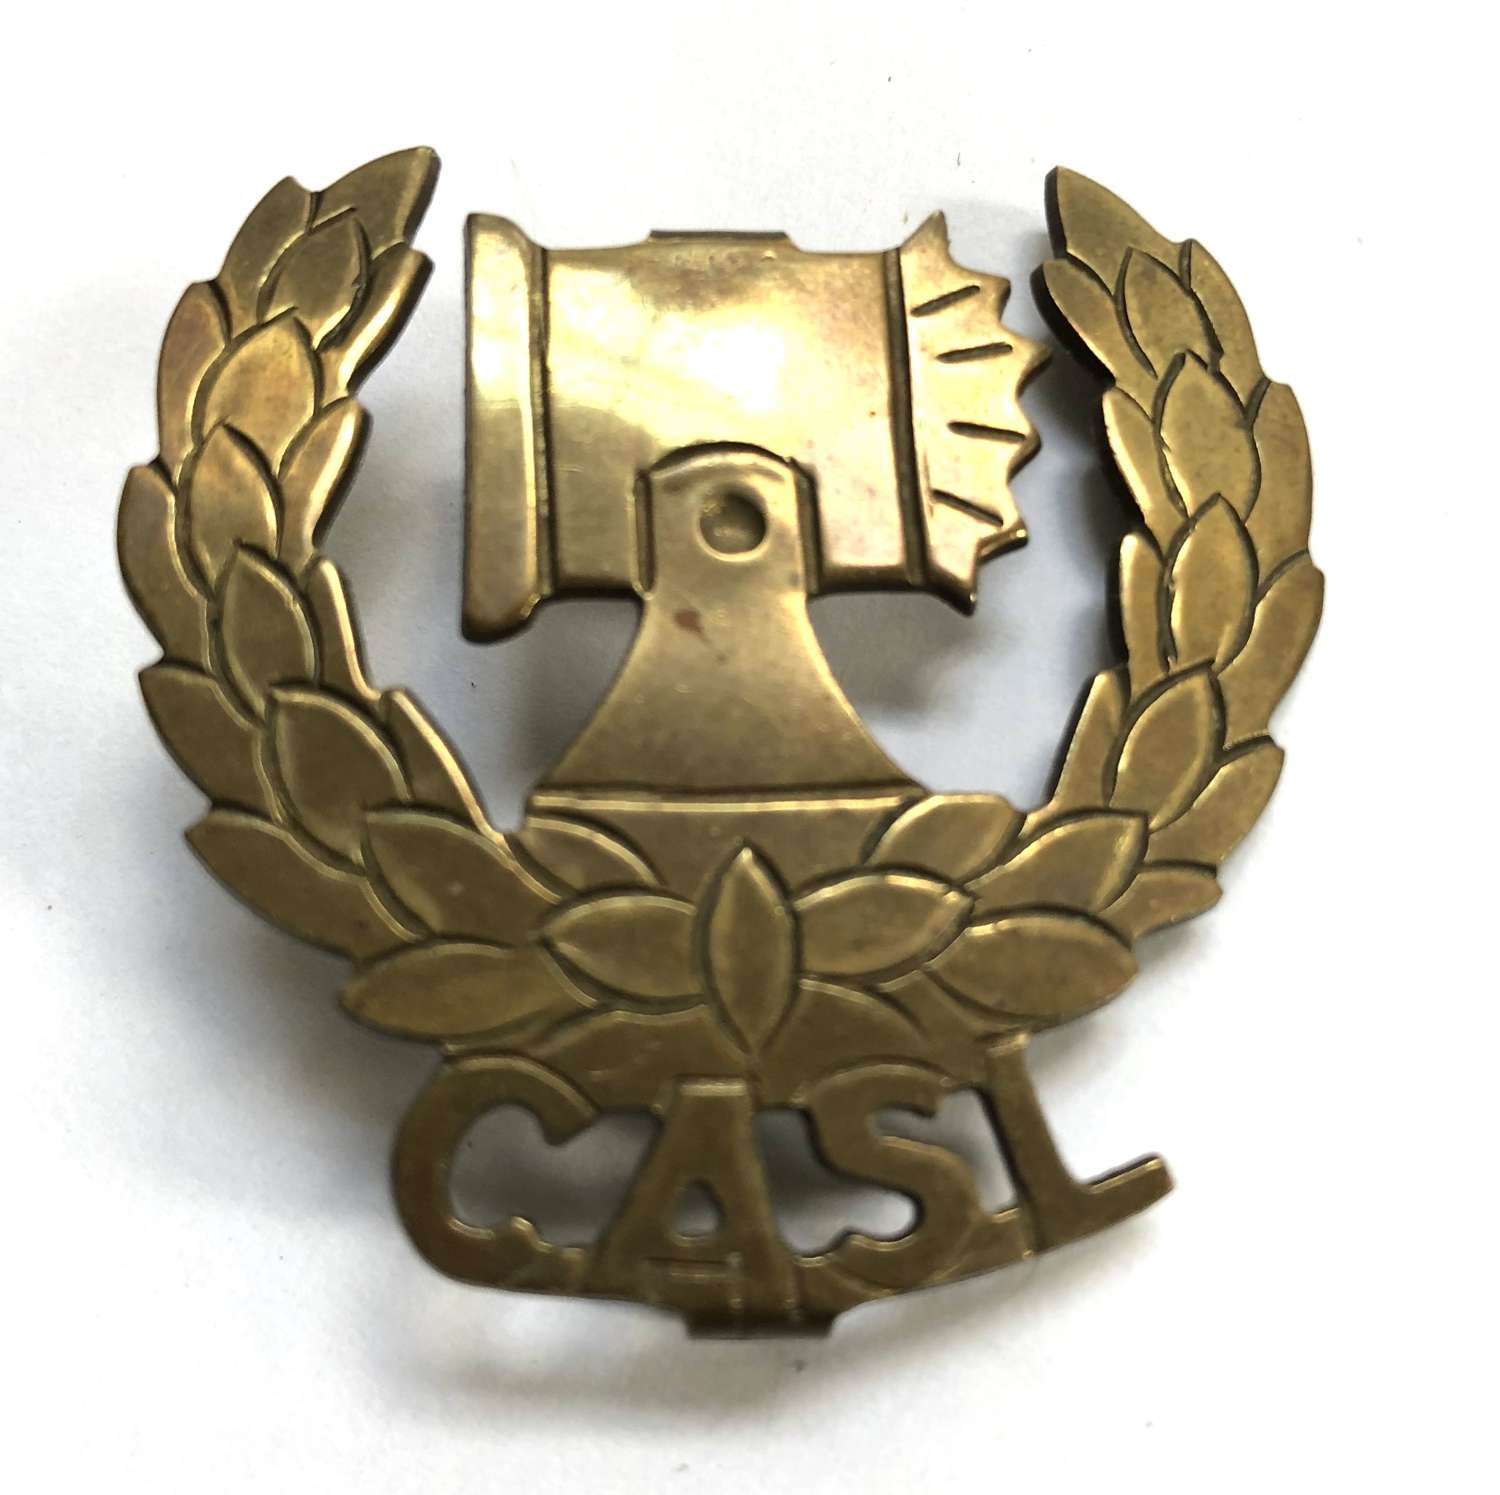 South Africa. Cape Artillery and Searchlight arm badge circa 1931-33